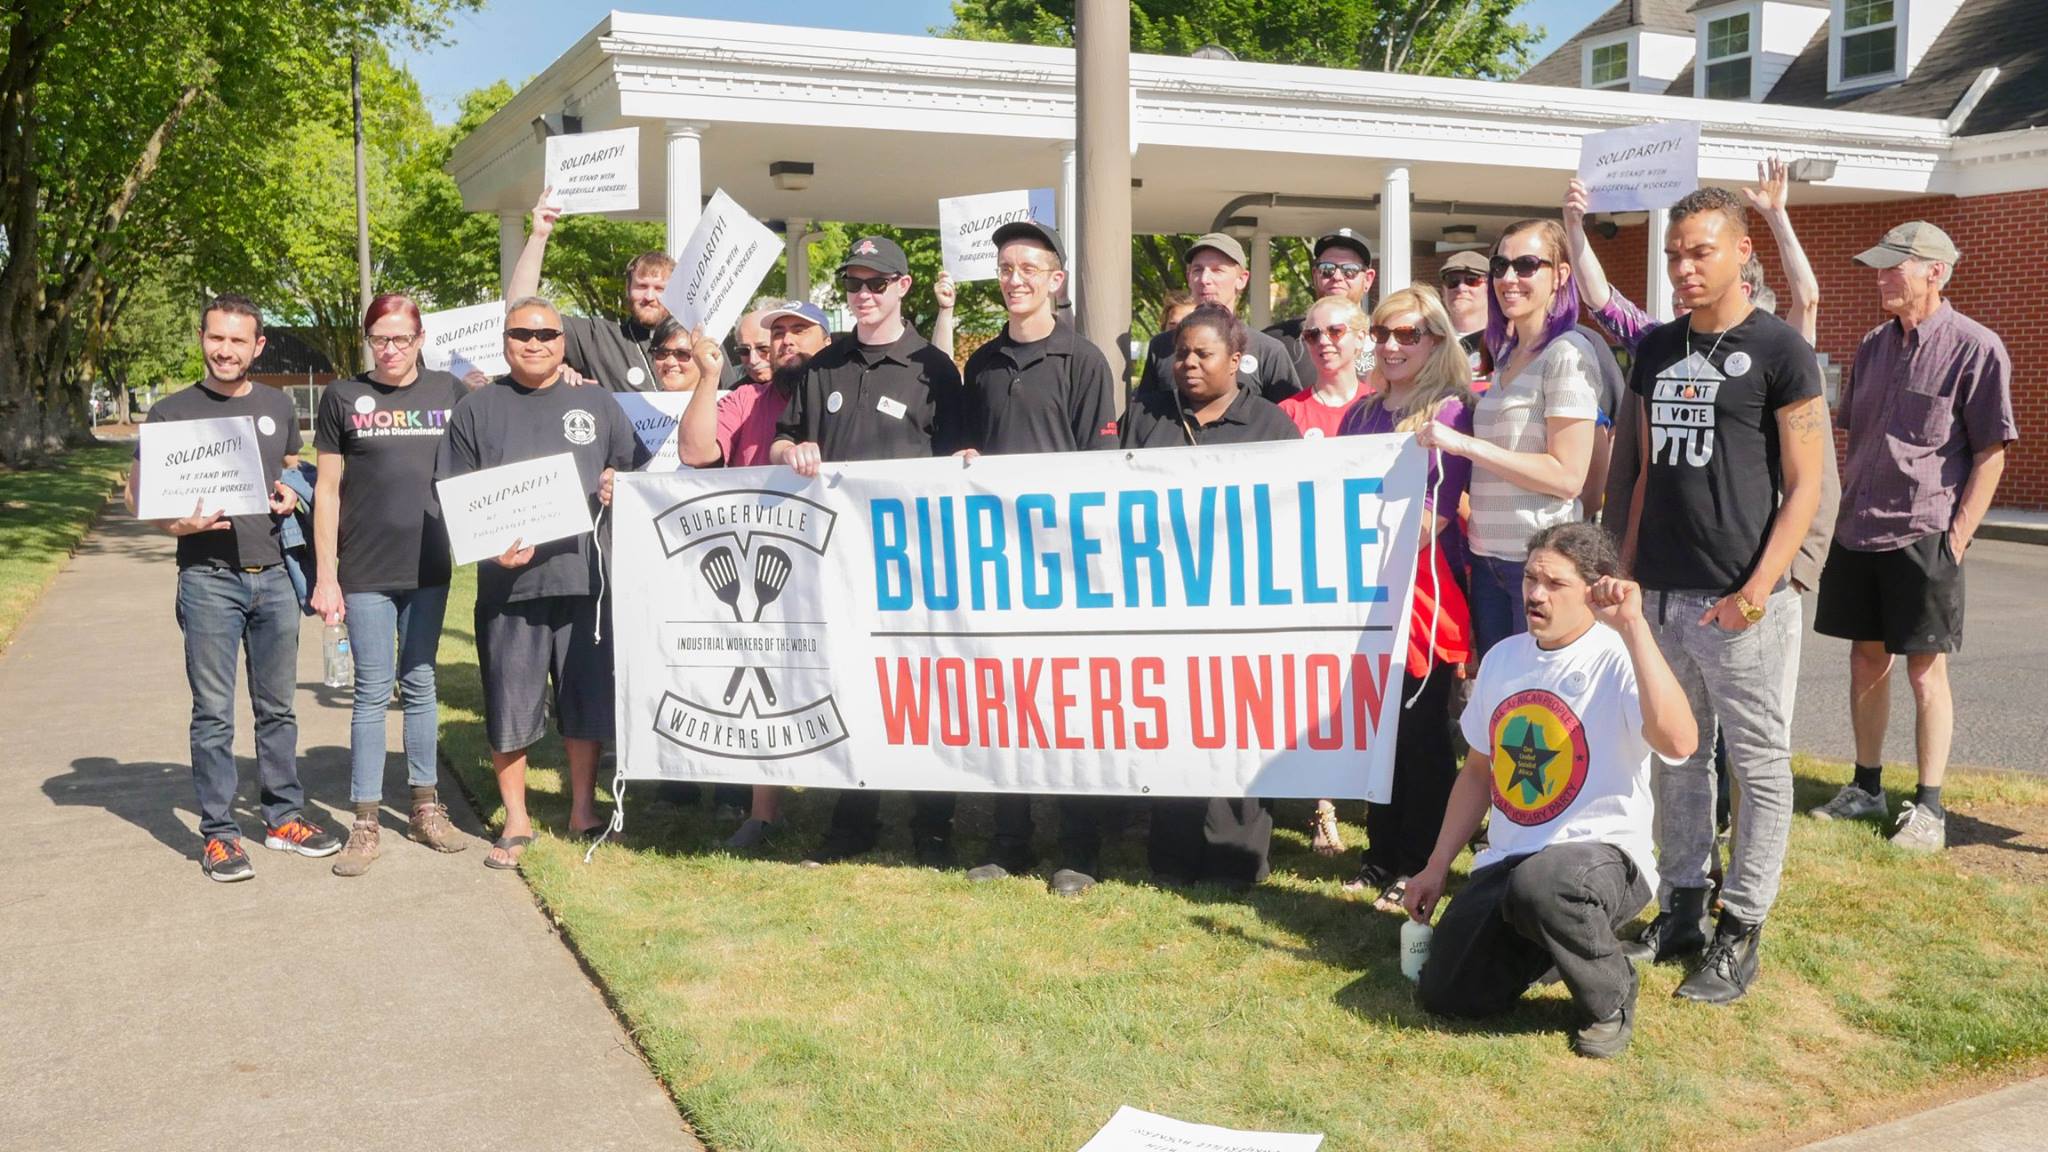 Standing Up With the Burgerville Workers Union